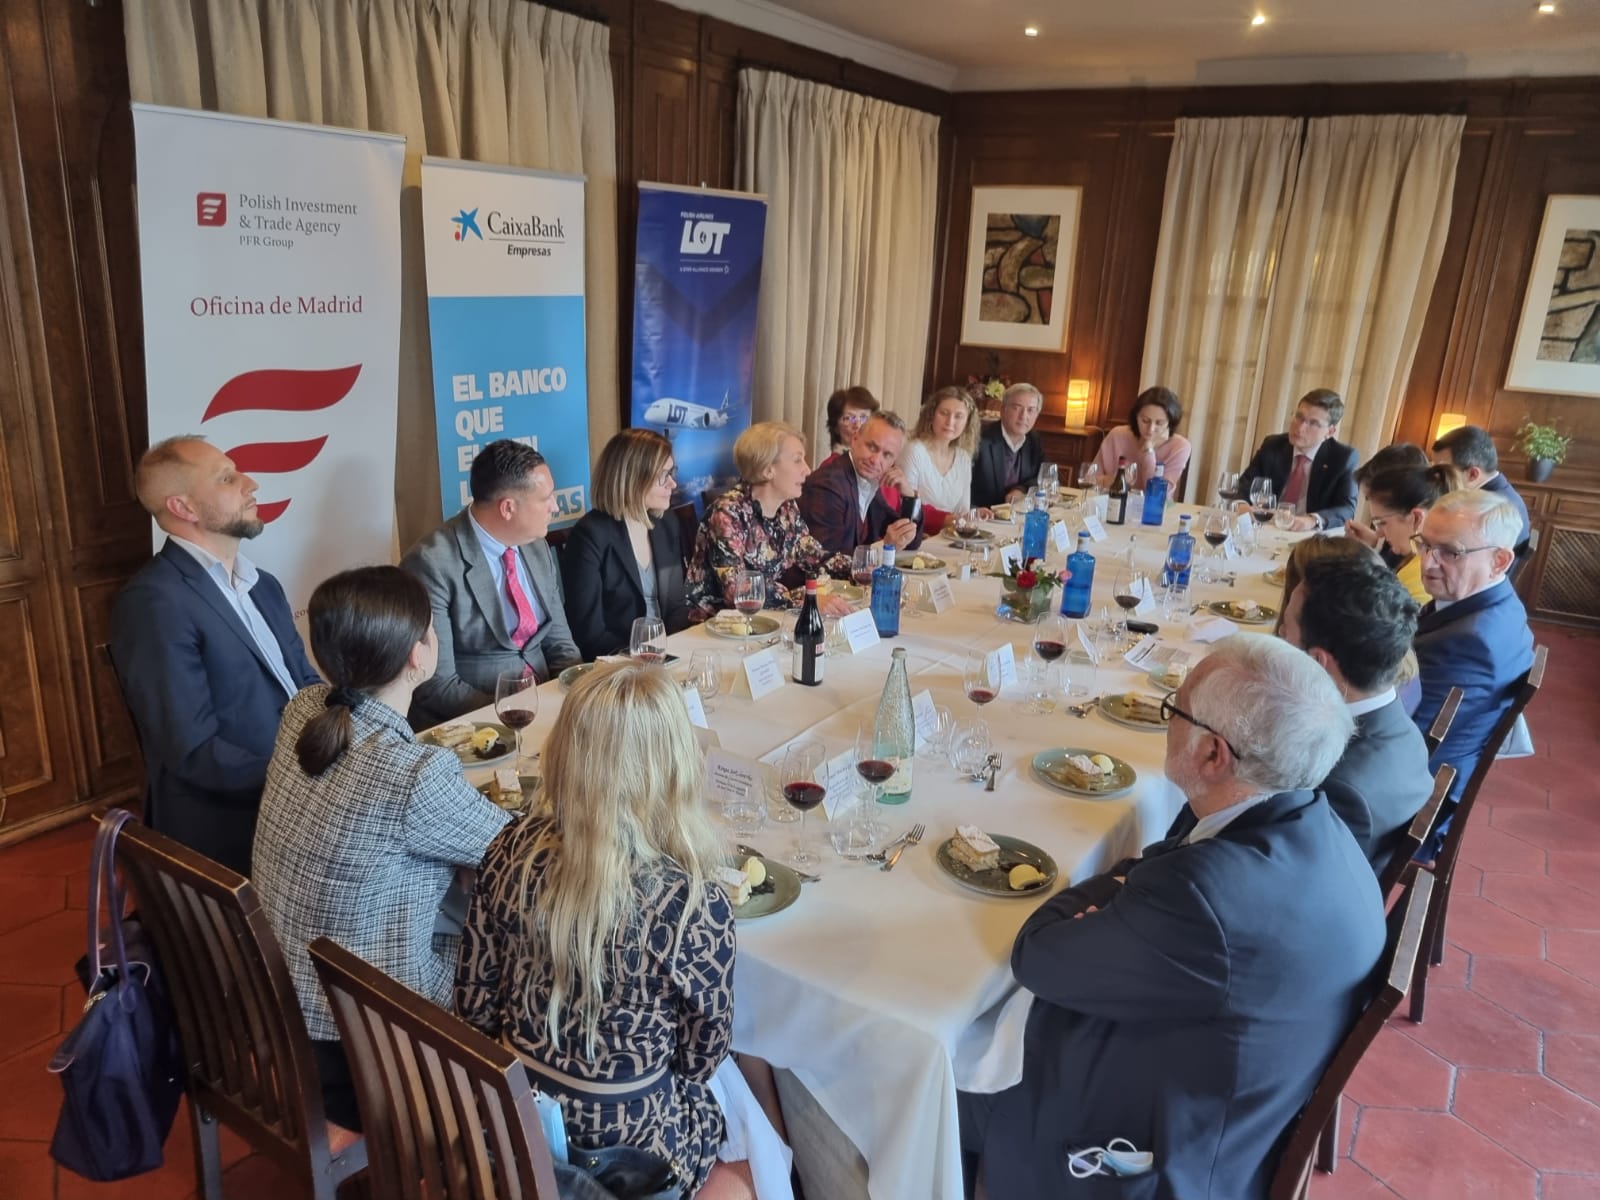 BUSINESS LUNCH FOR POLISH INVESTORS